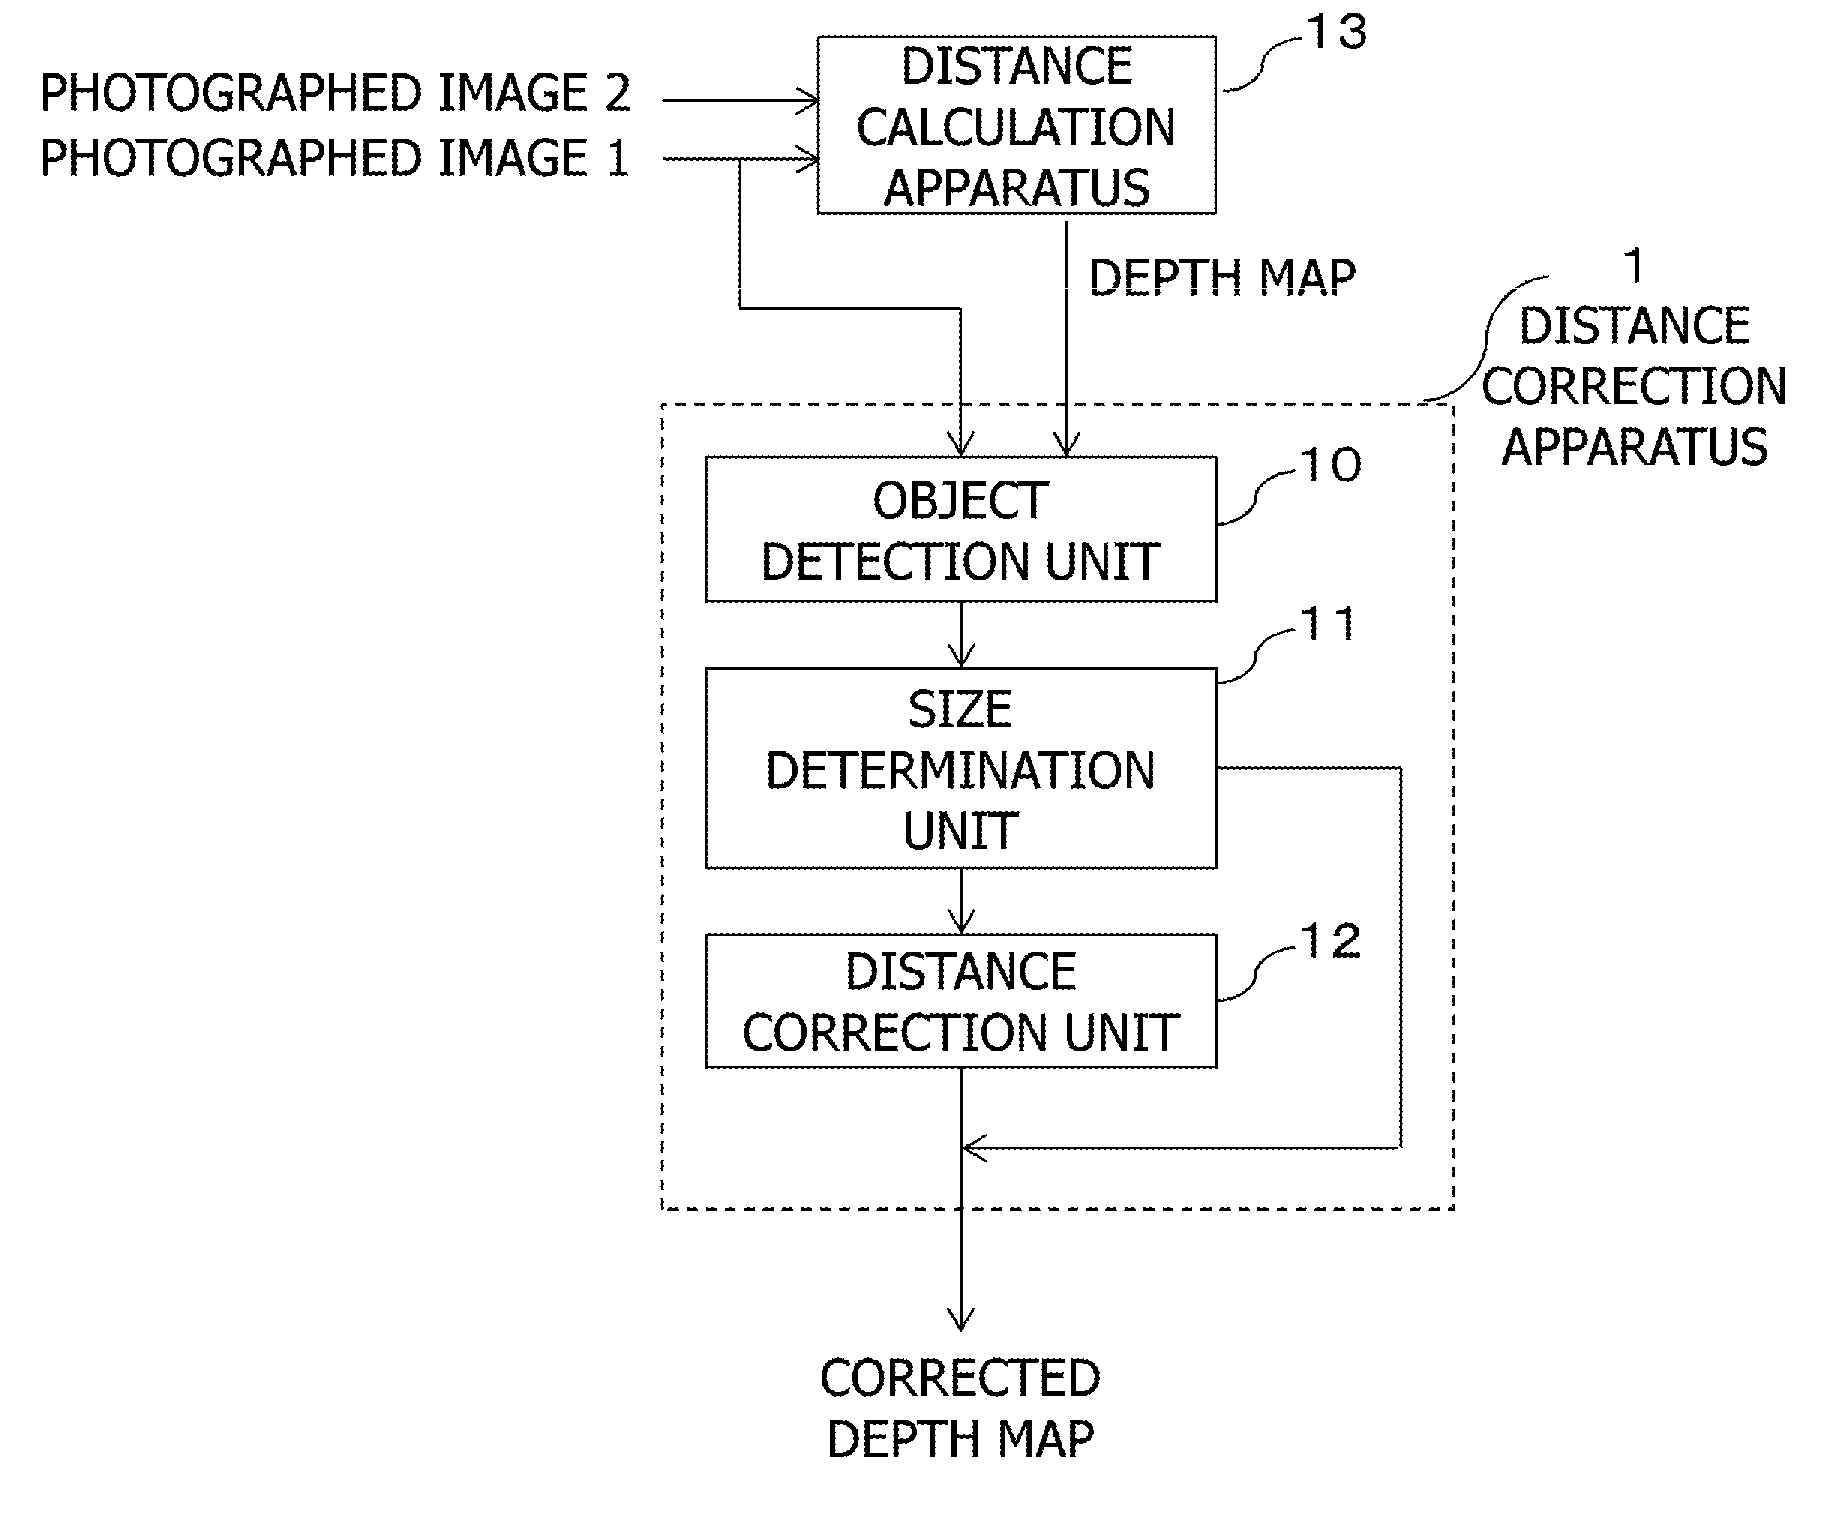 Image processing apparatus, imaging apparatus and distance correction method